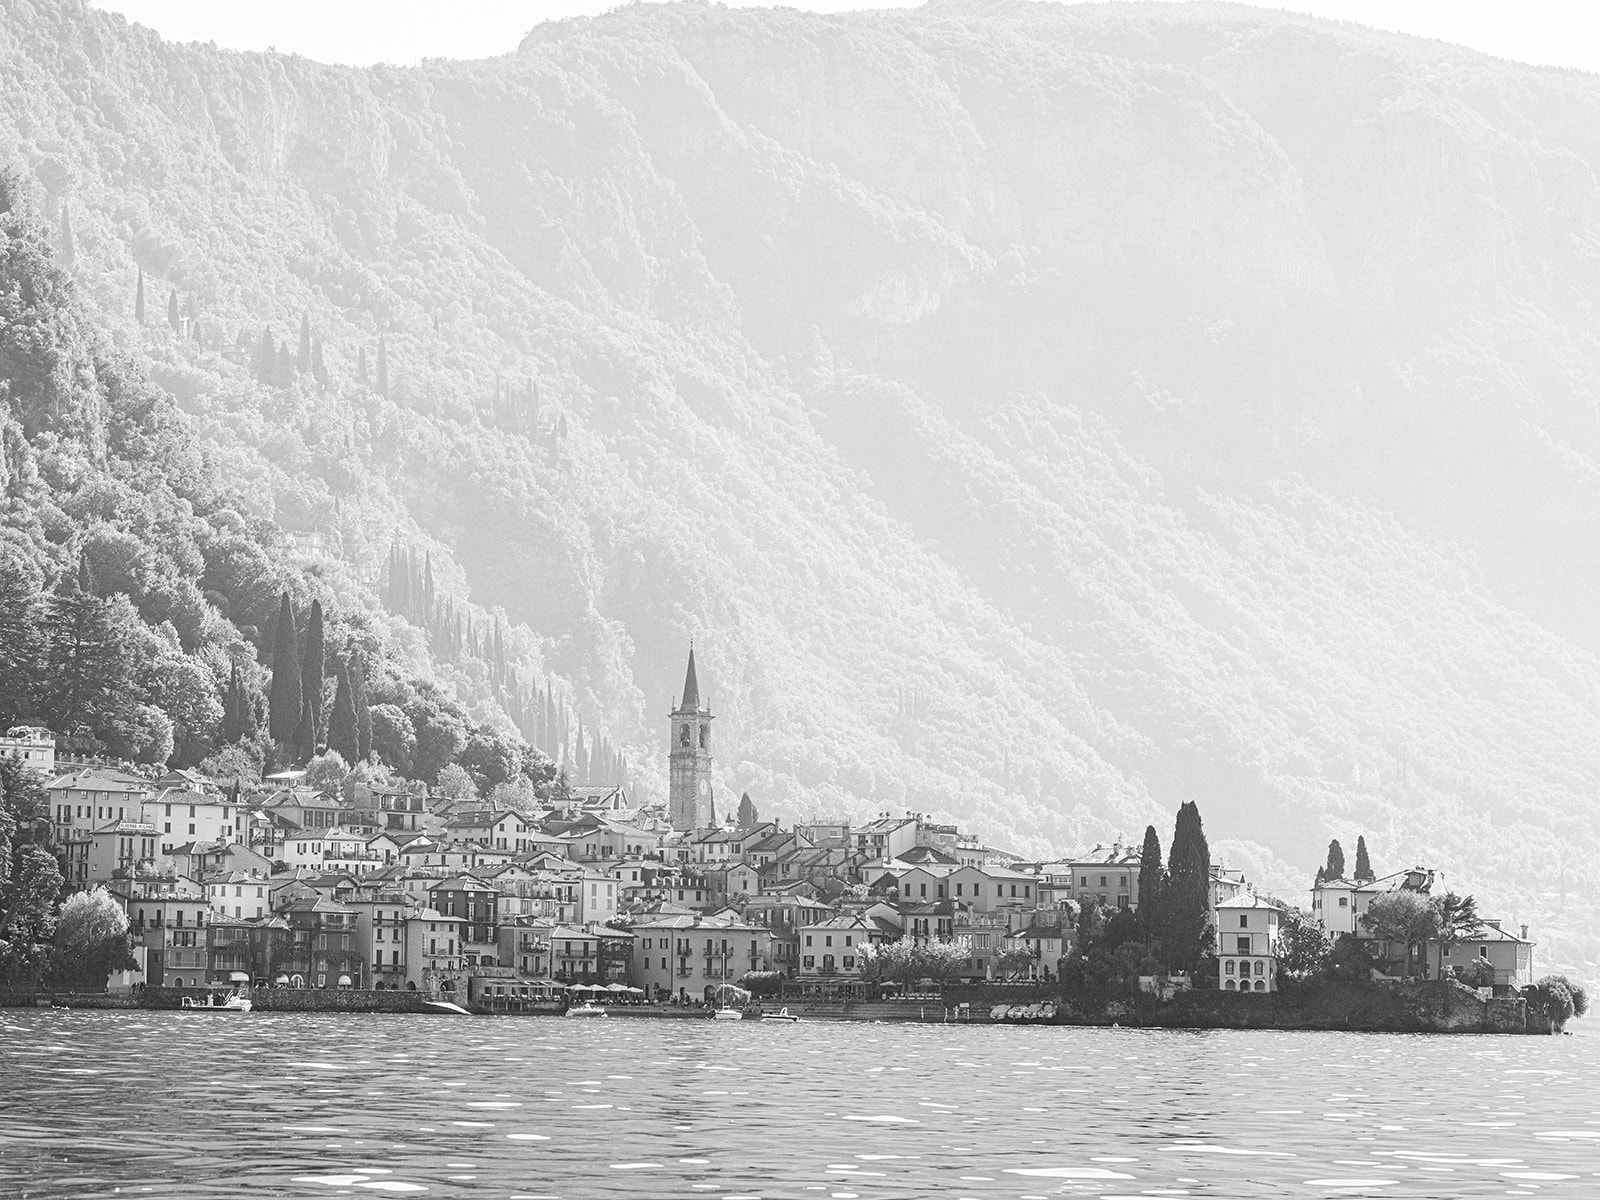 The town of Varenna with the mountains behind photographed from the middle of Lake Como in Italy